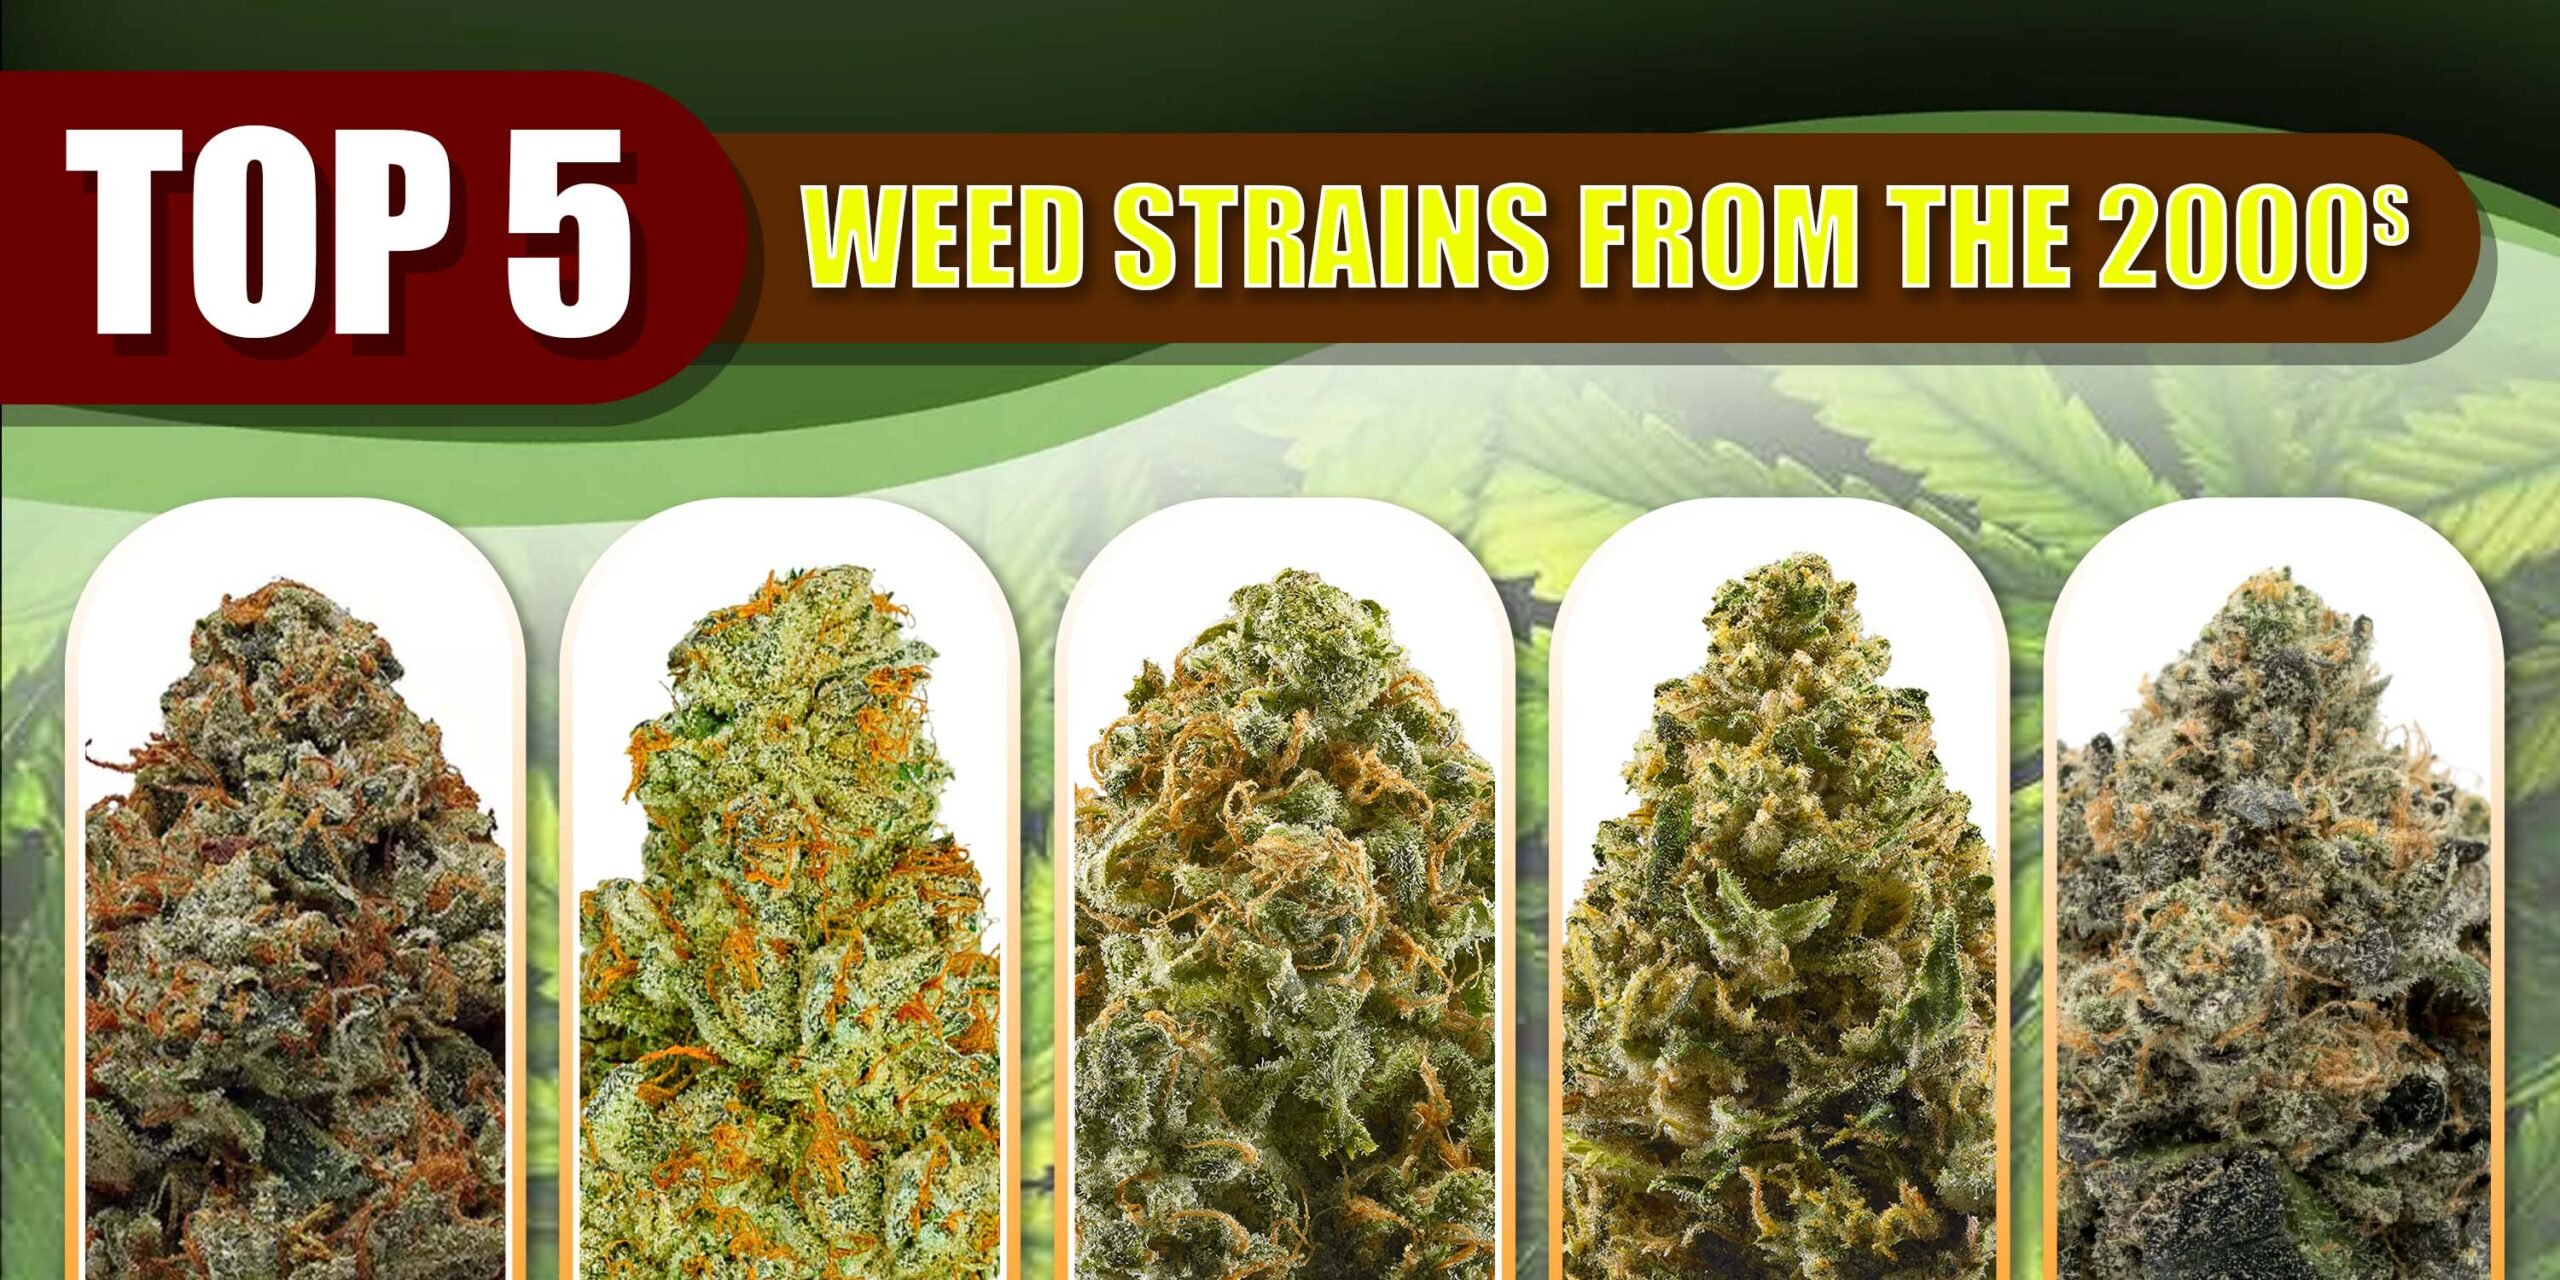 Top 5 Weed Strains From The 2000s